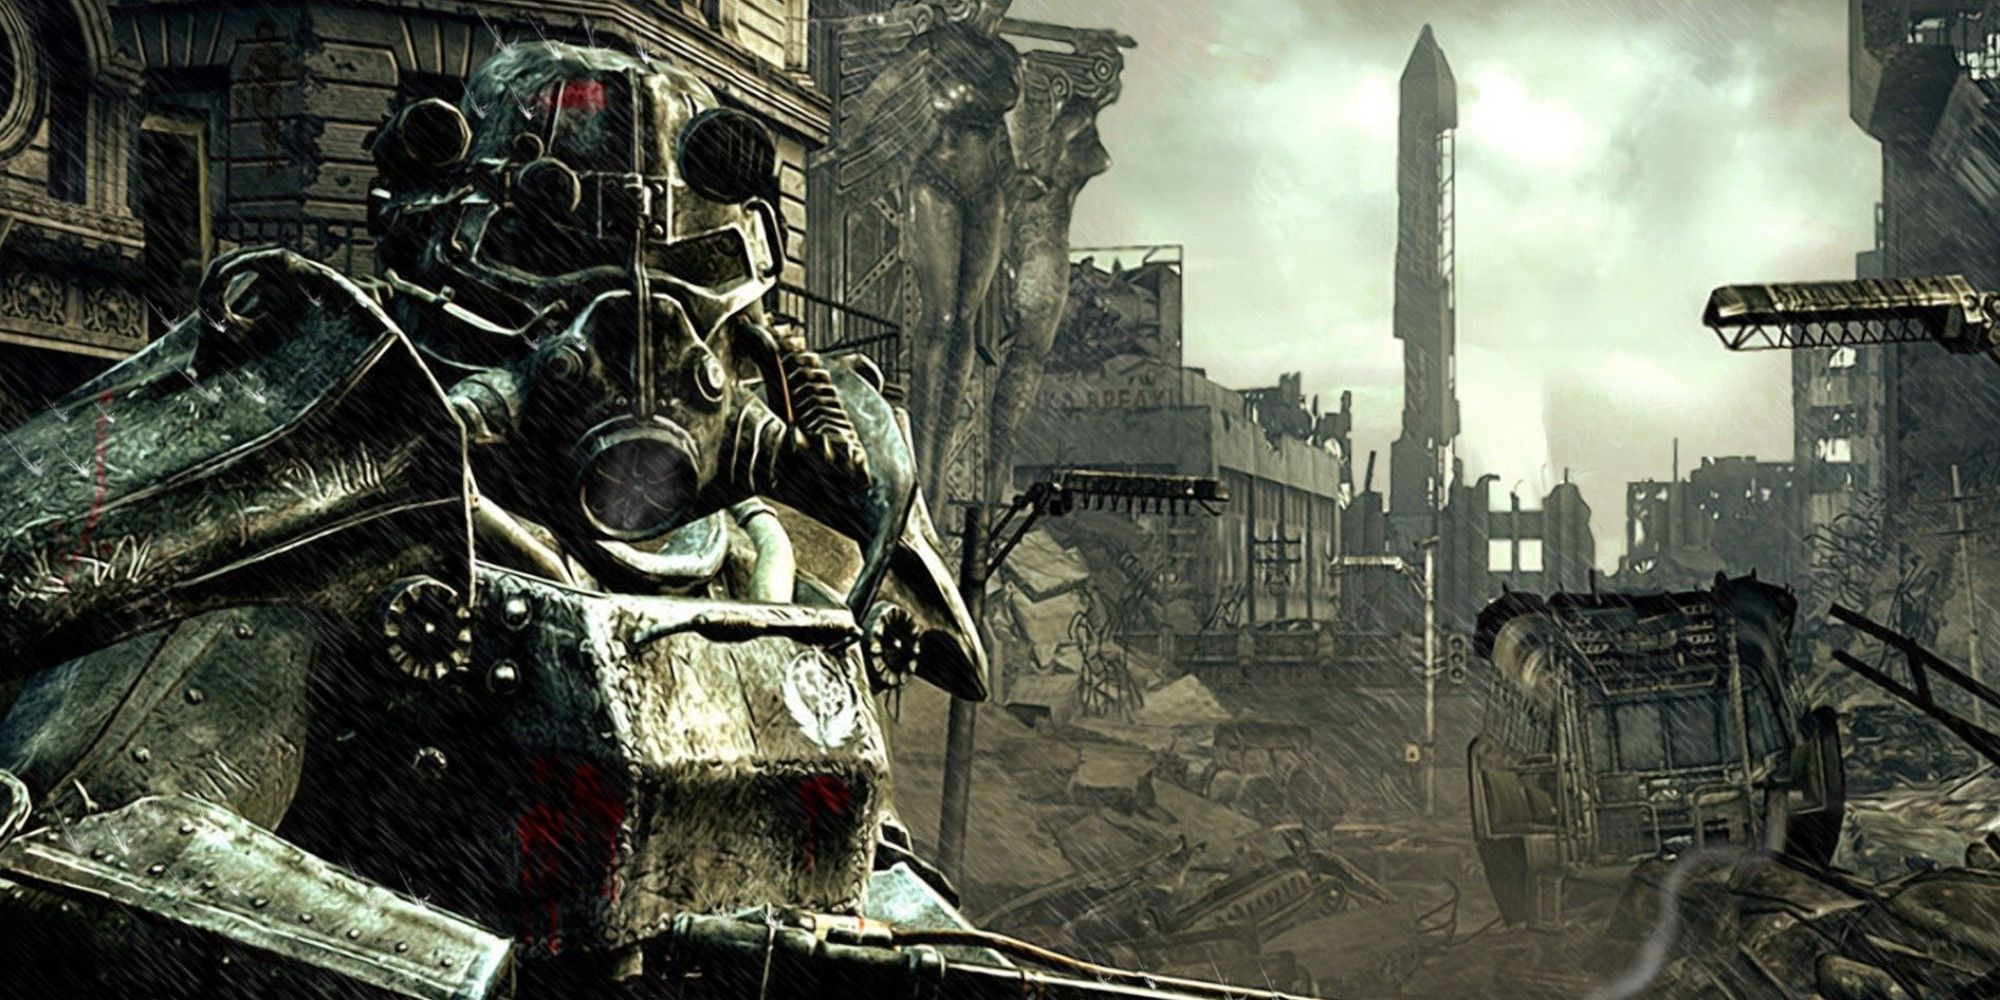 Fallout 3 A heavily armored soldier stands in a wasteland